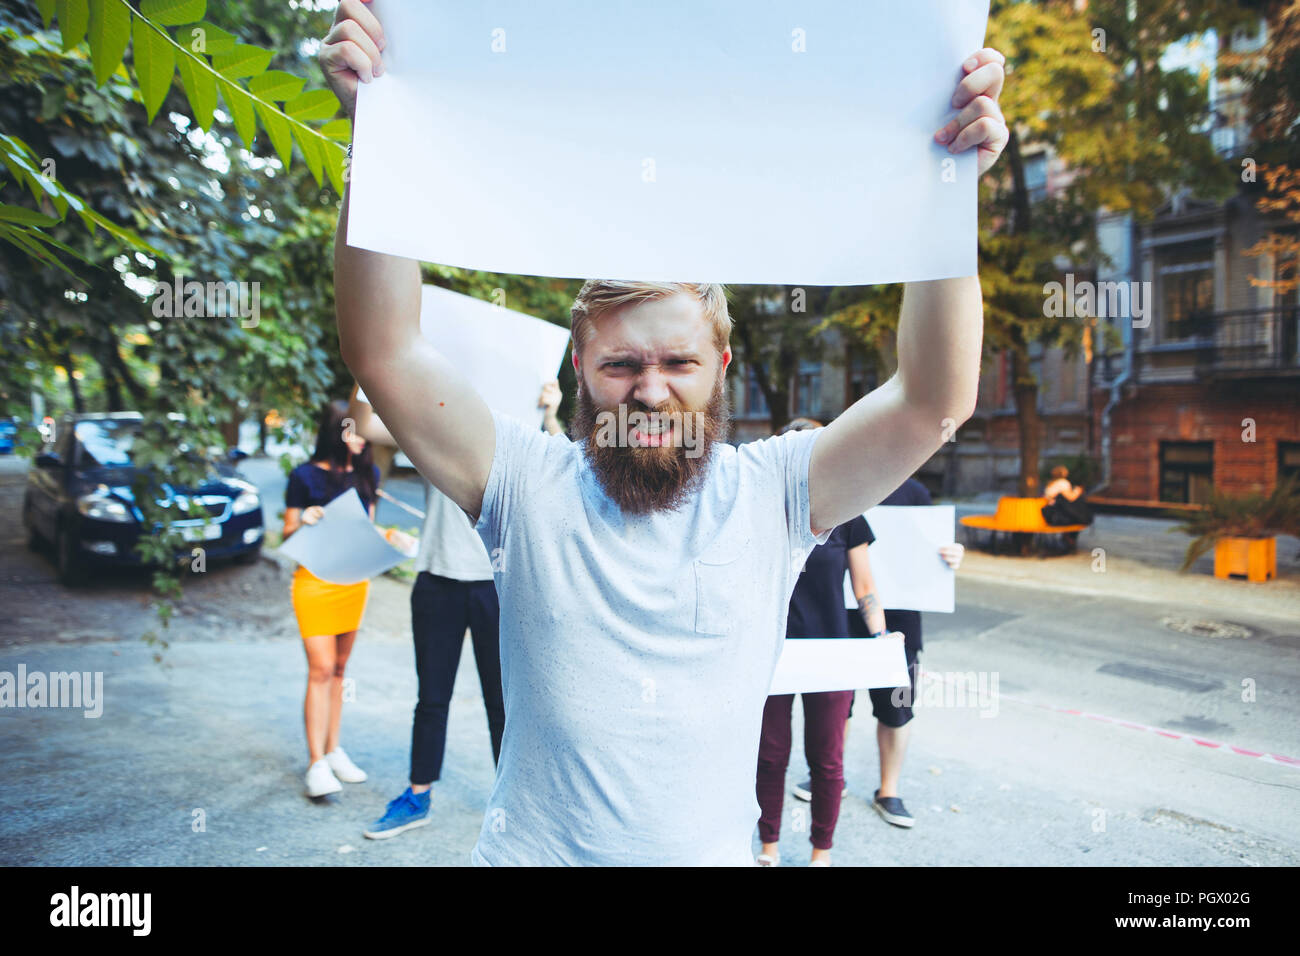 Group of protesting young people outdoors. The protest, people, demonstration, democracy, fight, rights, protesting concept. The caucasian men and womem holding empty posters or banners with copy space Stock Photo